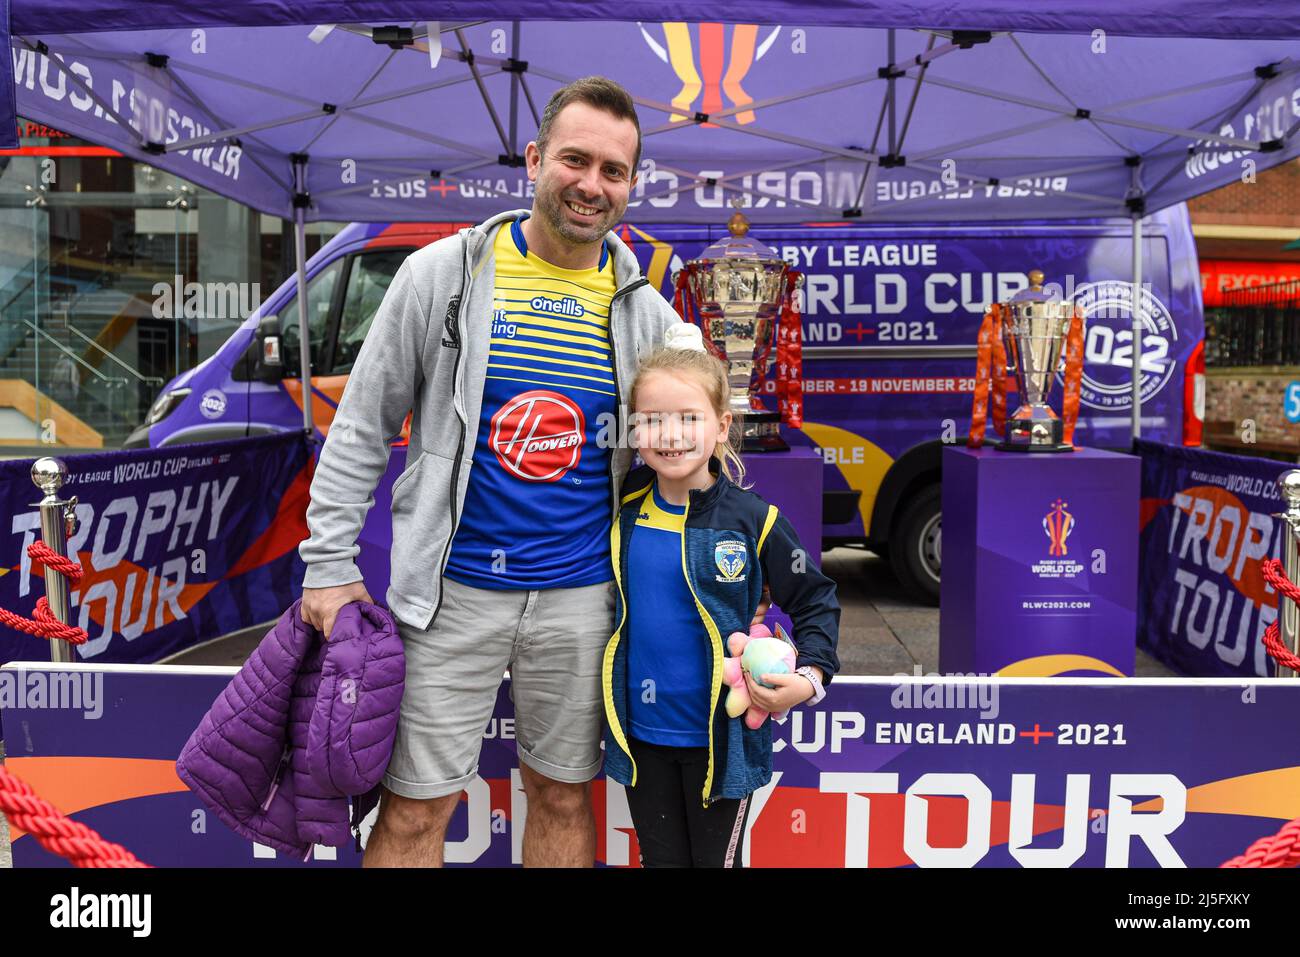 Some Warrington Wolves fans pose for photos next to the Rugby League World Cup Trophies in the fan zone before the game Stock Photo